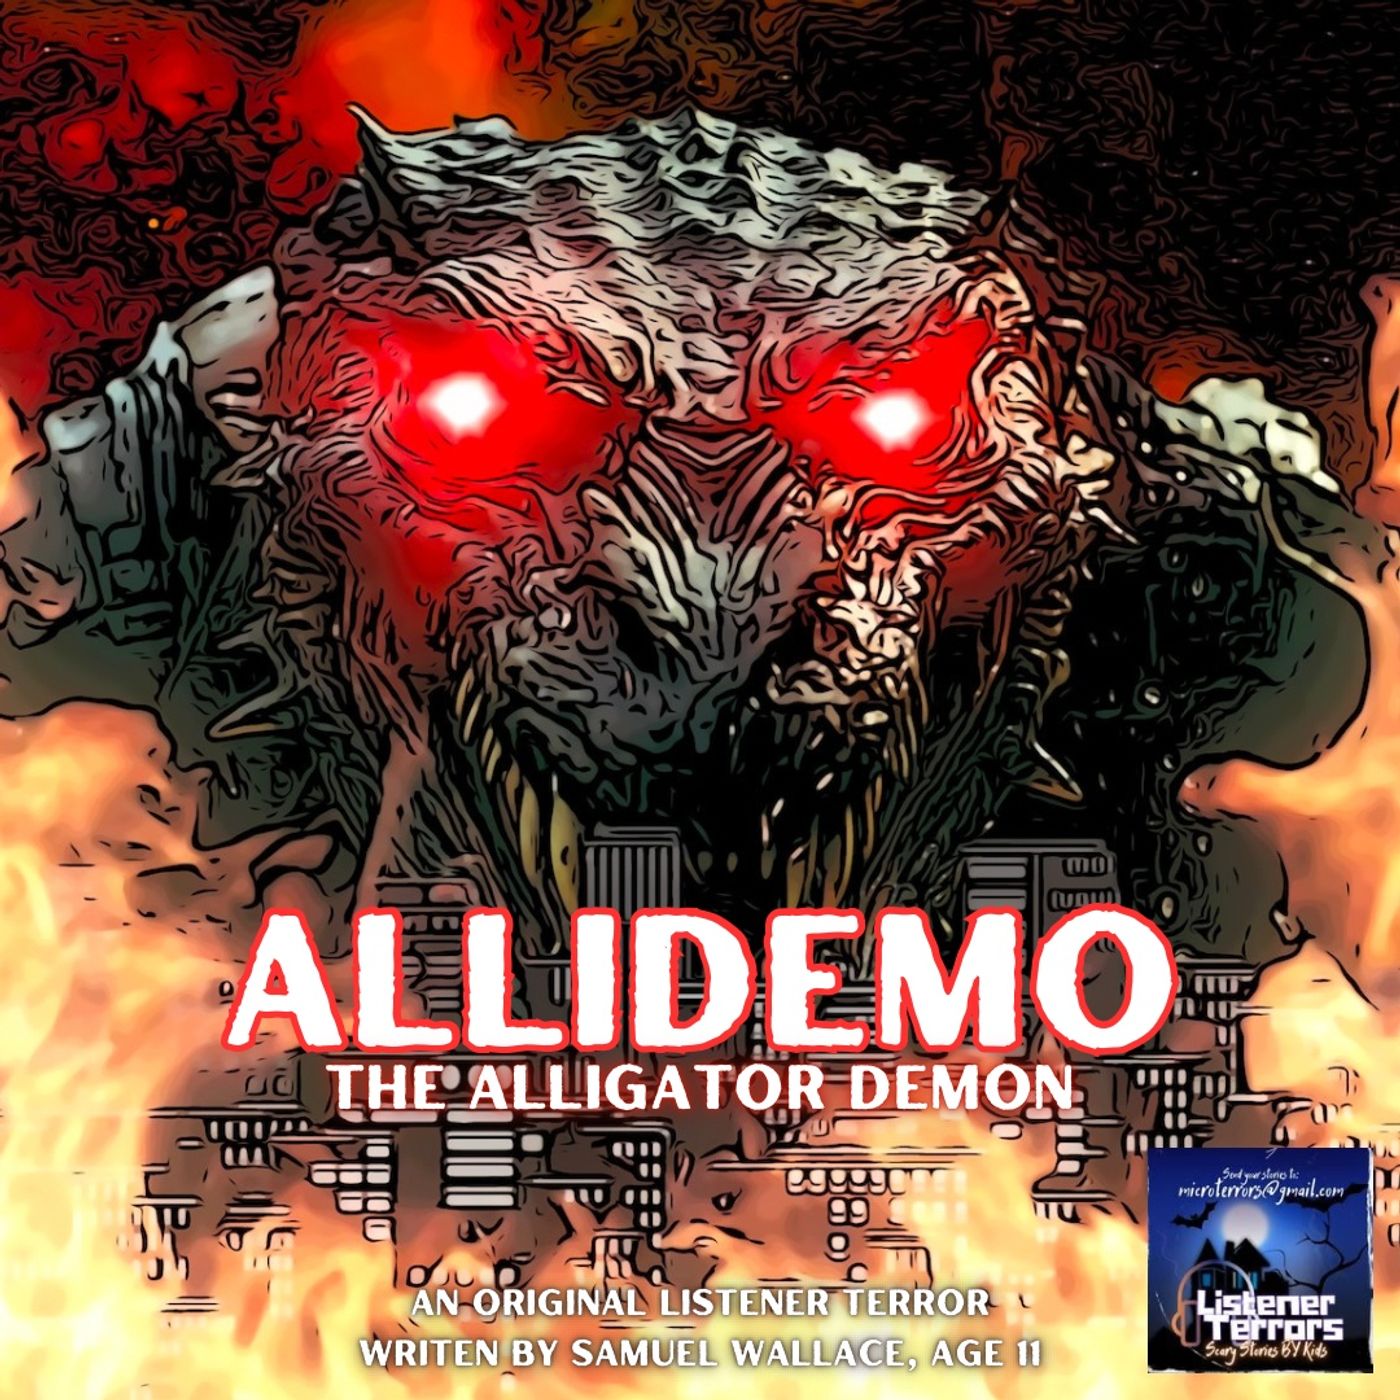 “ALLIDEMO: THE ALLIGATOR DEMON” by Samuel Wallace, age 11 #MicroTerrors